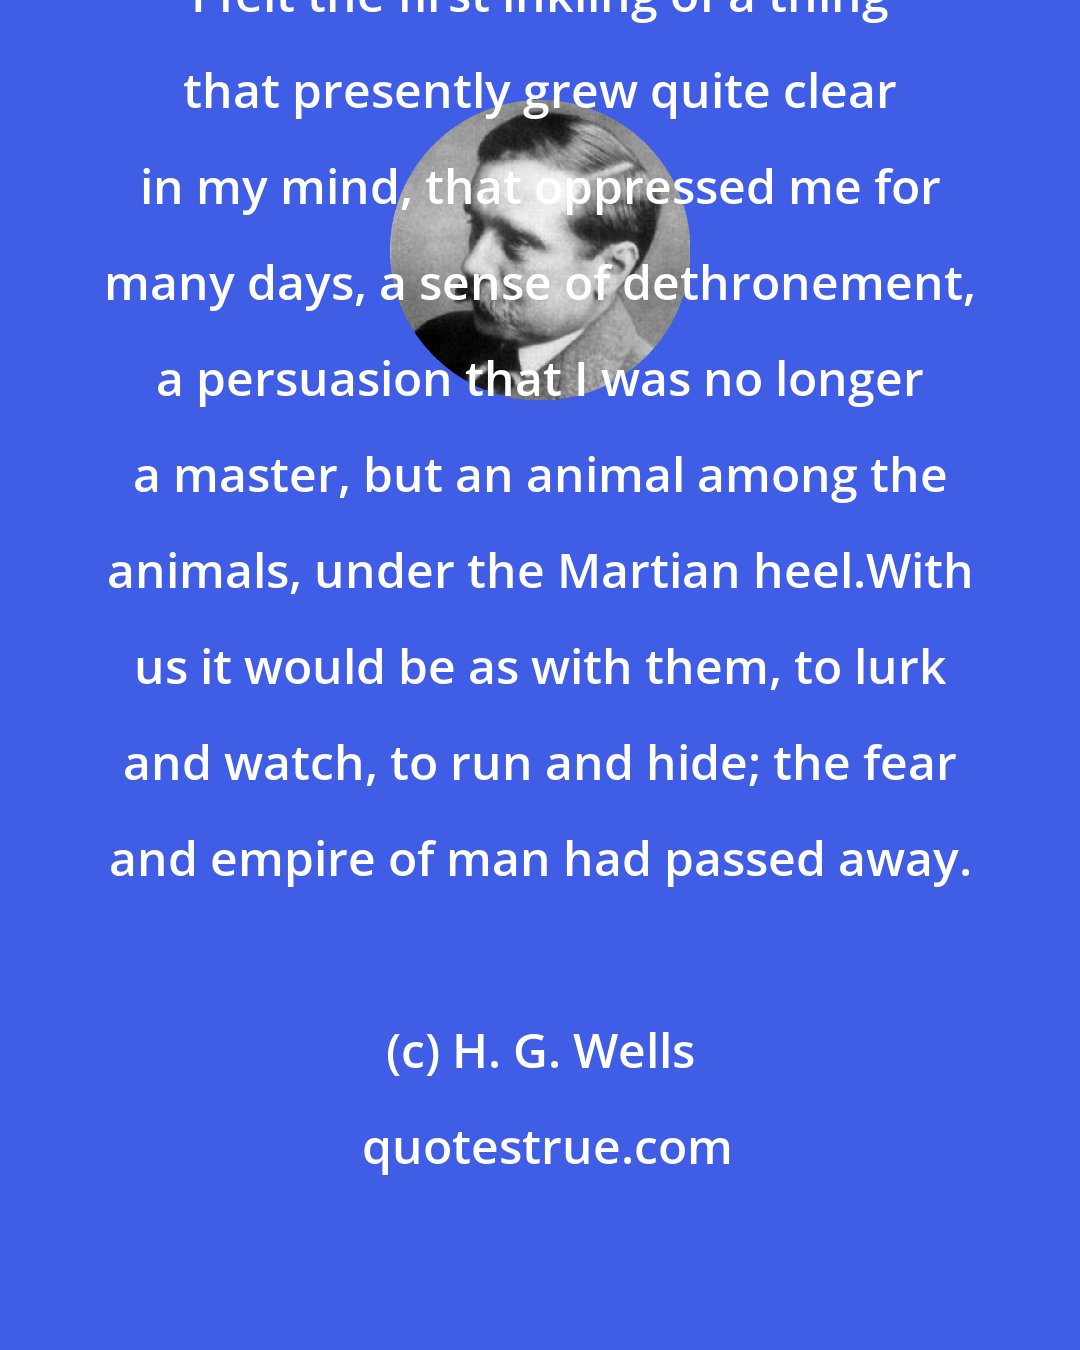 H. G. Wells: I felt the first inkling of a thing that presently grew quite clear in my mind, that oppressed me for many days, a sense of dethronement, a persuasion that I was no longer a master, but an animal among the animals, under the Martian heel.With us it would be as with them, to lurk and watch, to run and hide; the fear and empire of man had passed away.